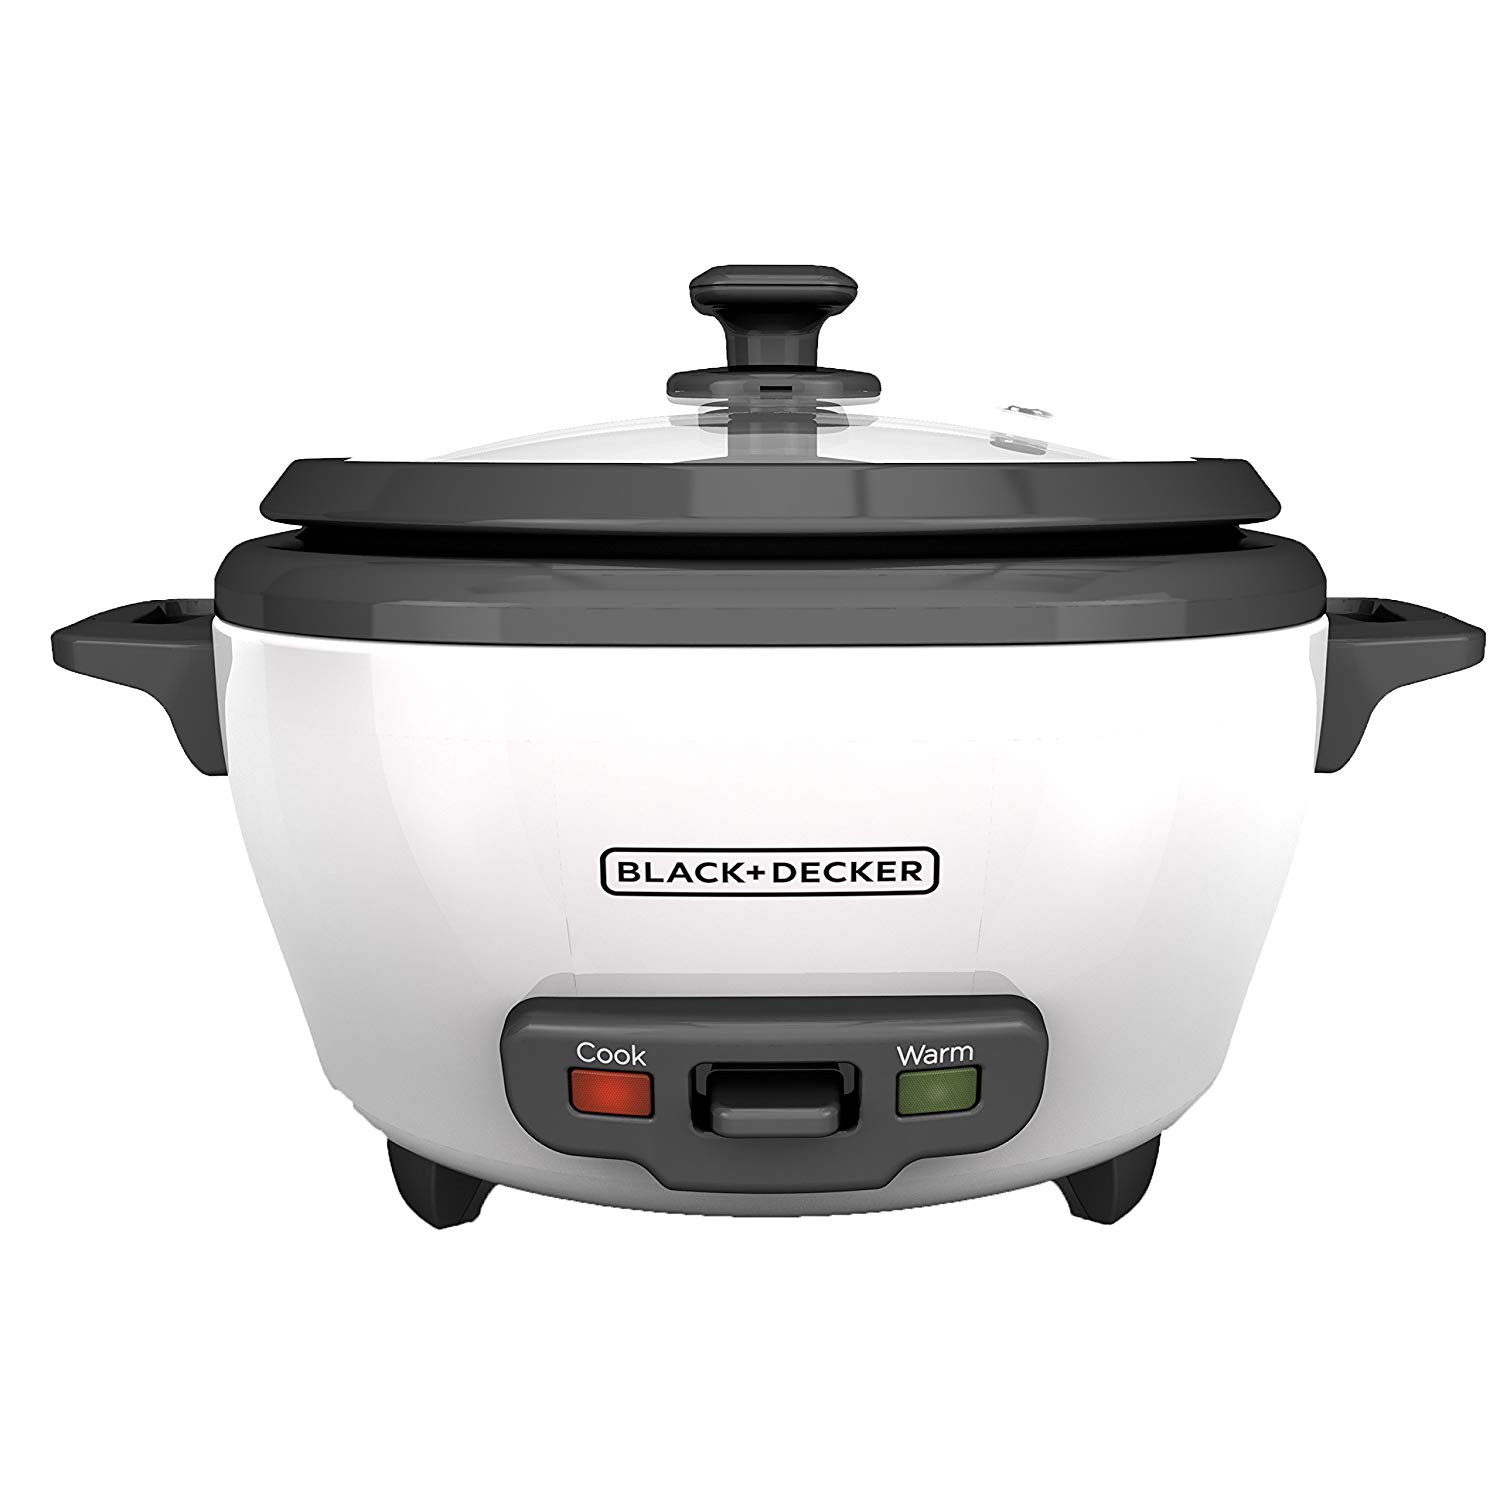 Hamilton Beach Digital Programmable Rice Cooker & Food Steamer, 8 Cups  Cooked (4 Uncooked), With Steam & Rinse Basket, Stainless Steel (37518) 